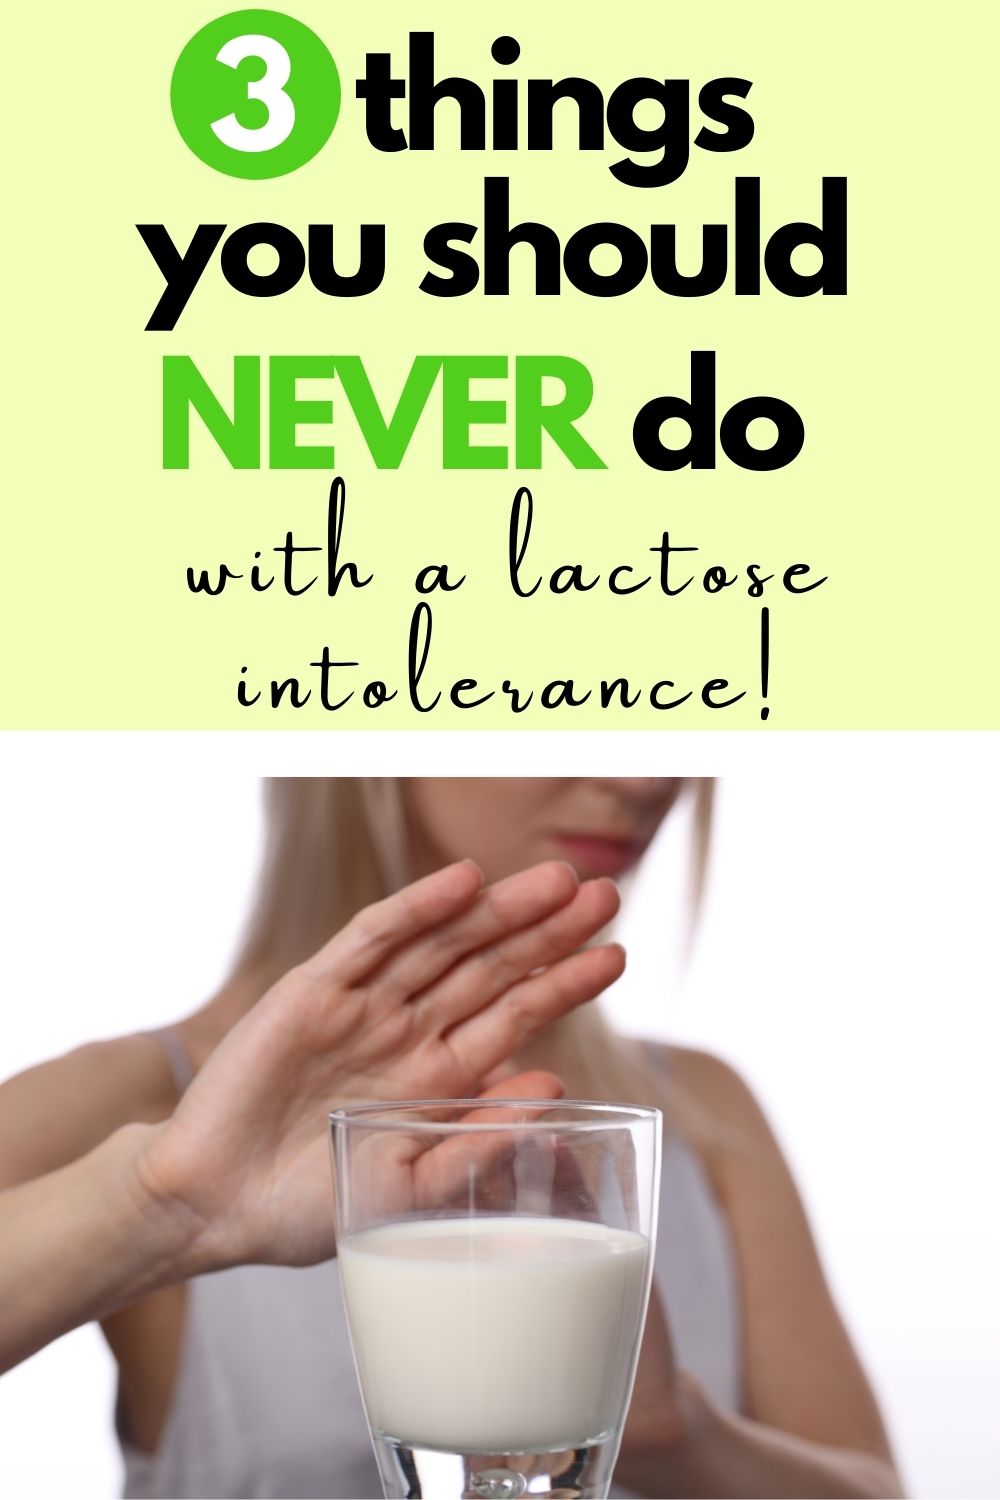 3 things never do with a lactose intolerance